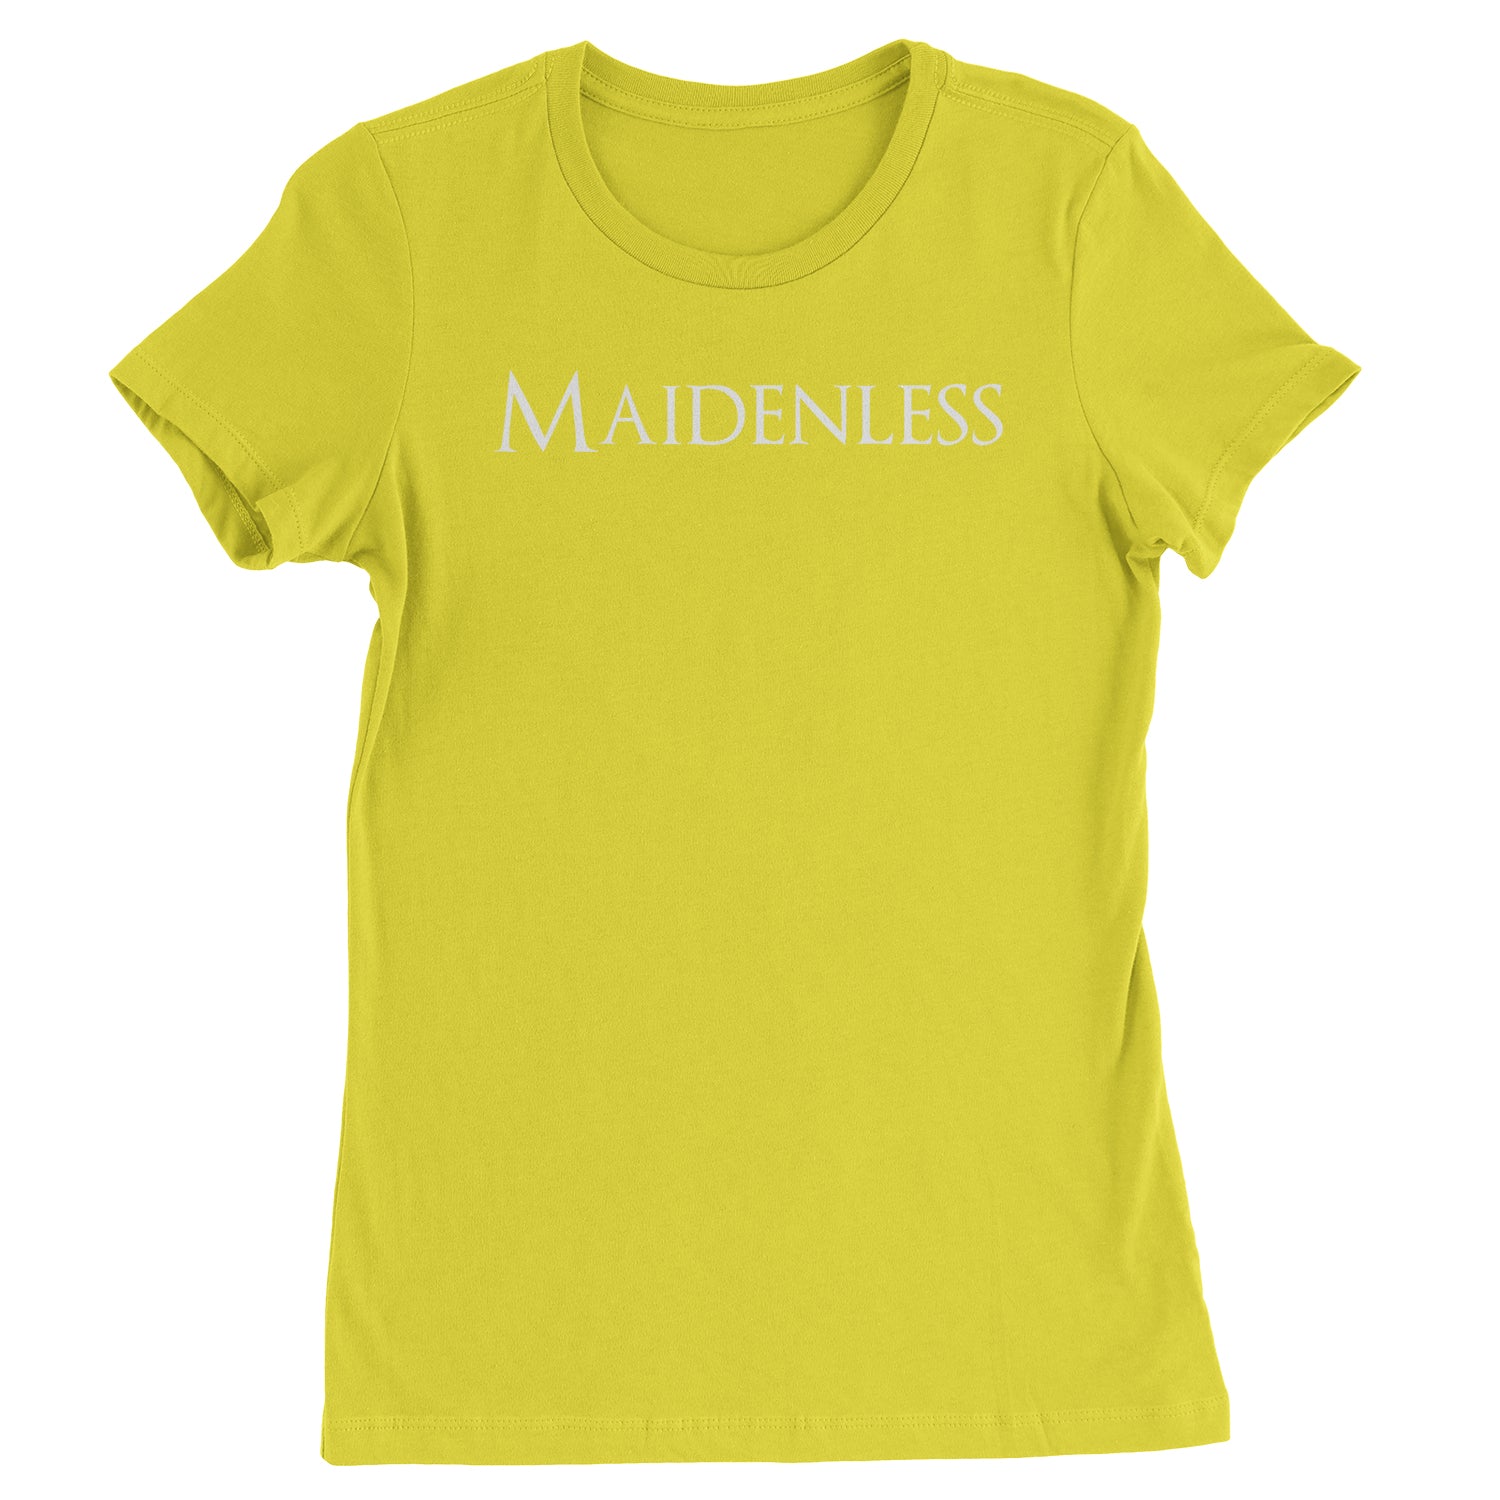 Maidenless Womens T-shirt elden, game, video by Expression Tees